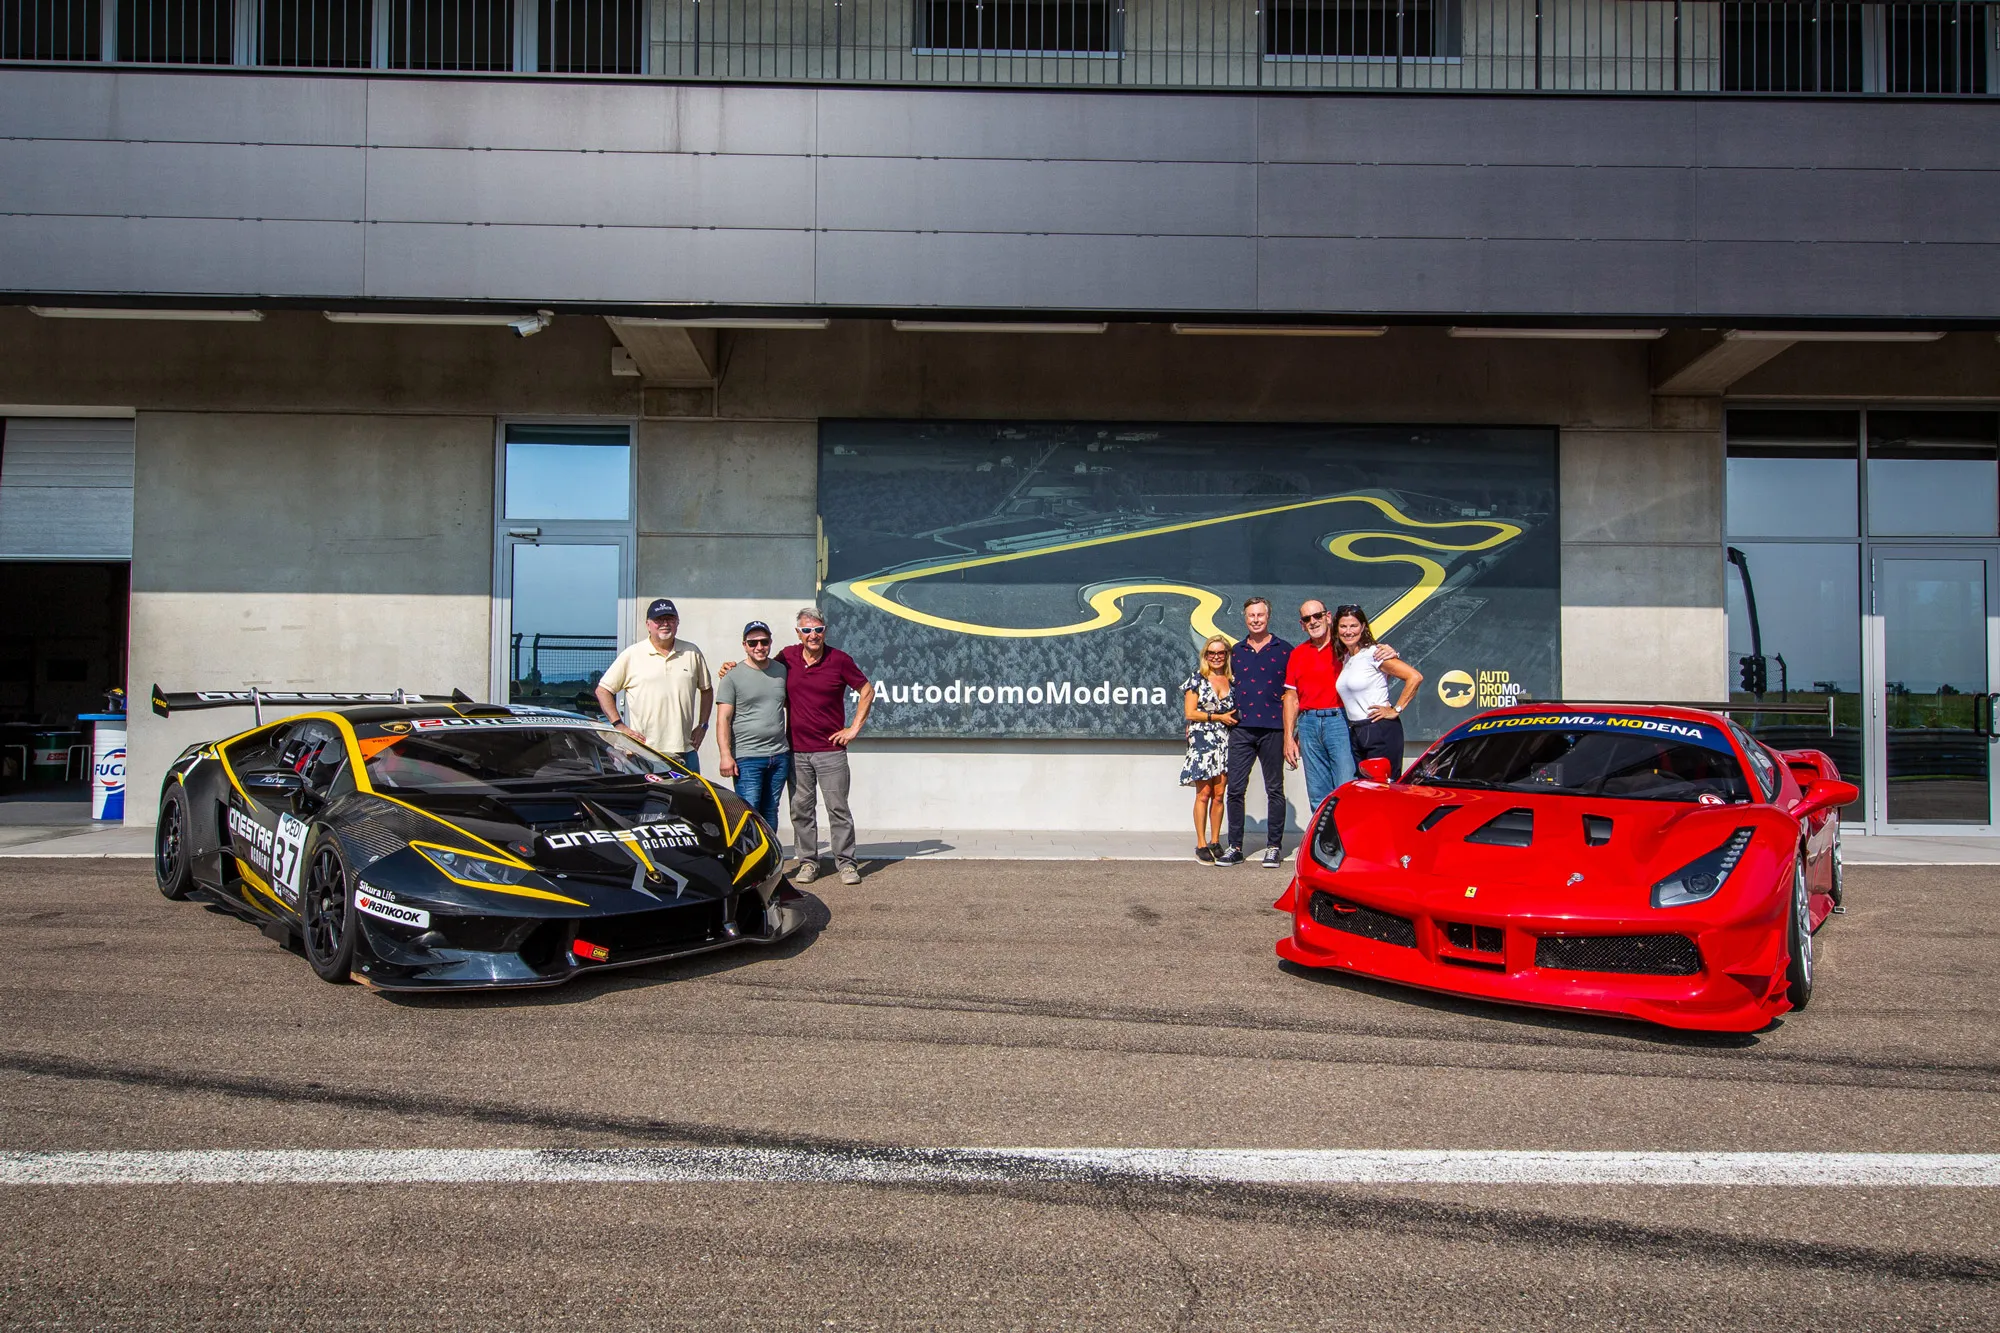 Enjoy an exclusive supercar track day in Italy driving Ferraris and Lamborghinis